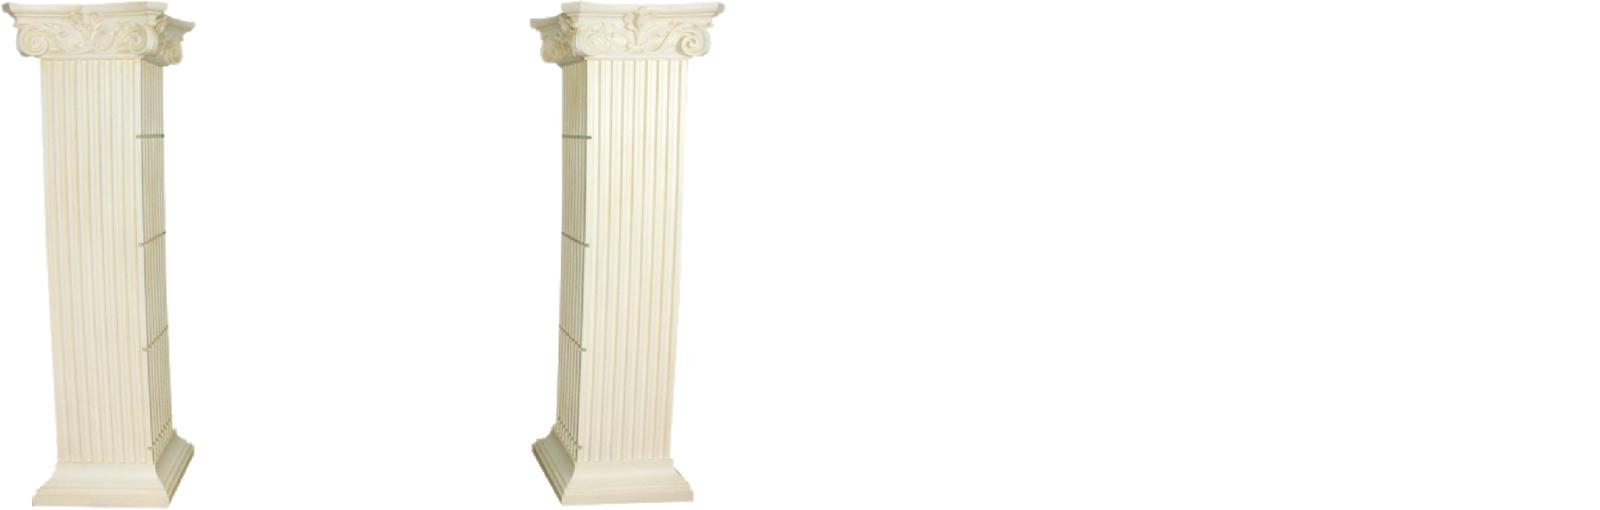 Decorative side columns in antique greek corinthian order style for glass shelves, 210cm height